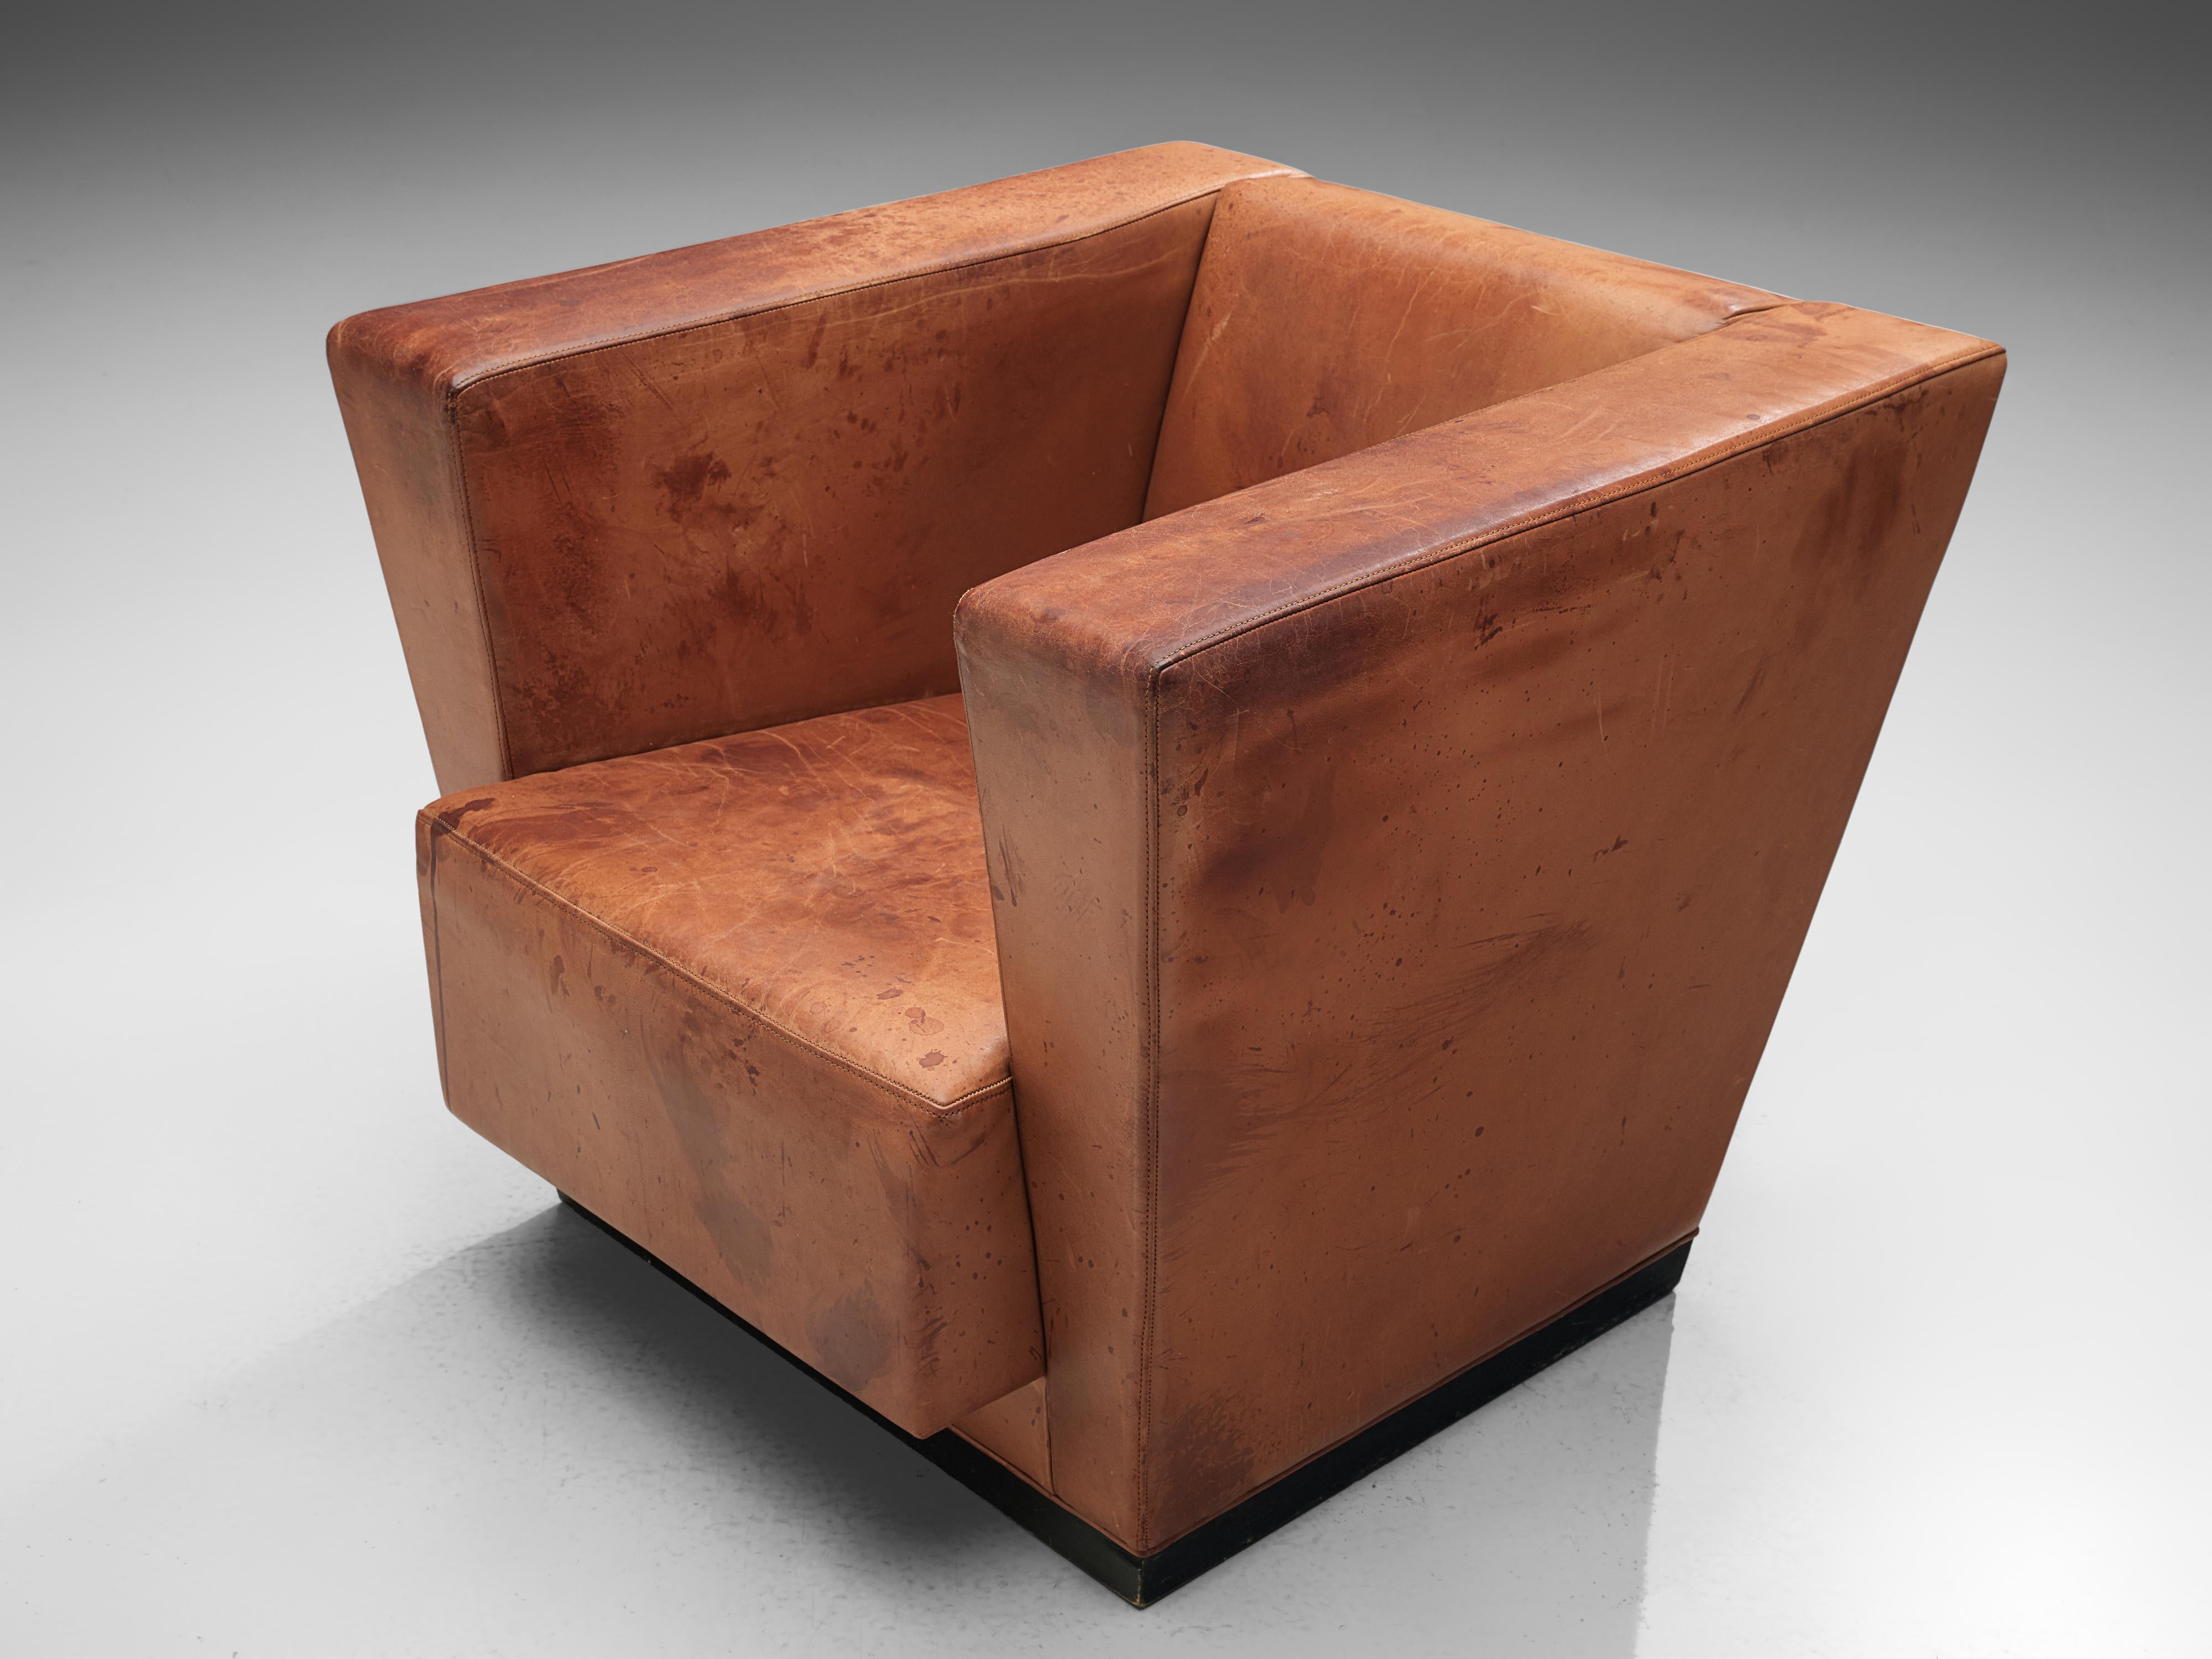 Swedish Rare Axel Einar Hjorth ‘Lido’ Lounge Chair in Original Patinated Leather